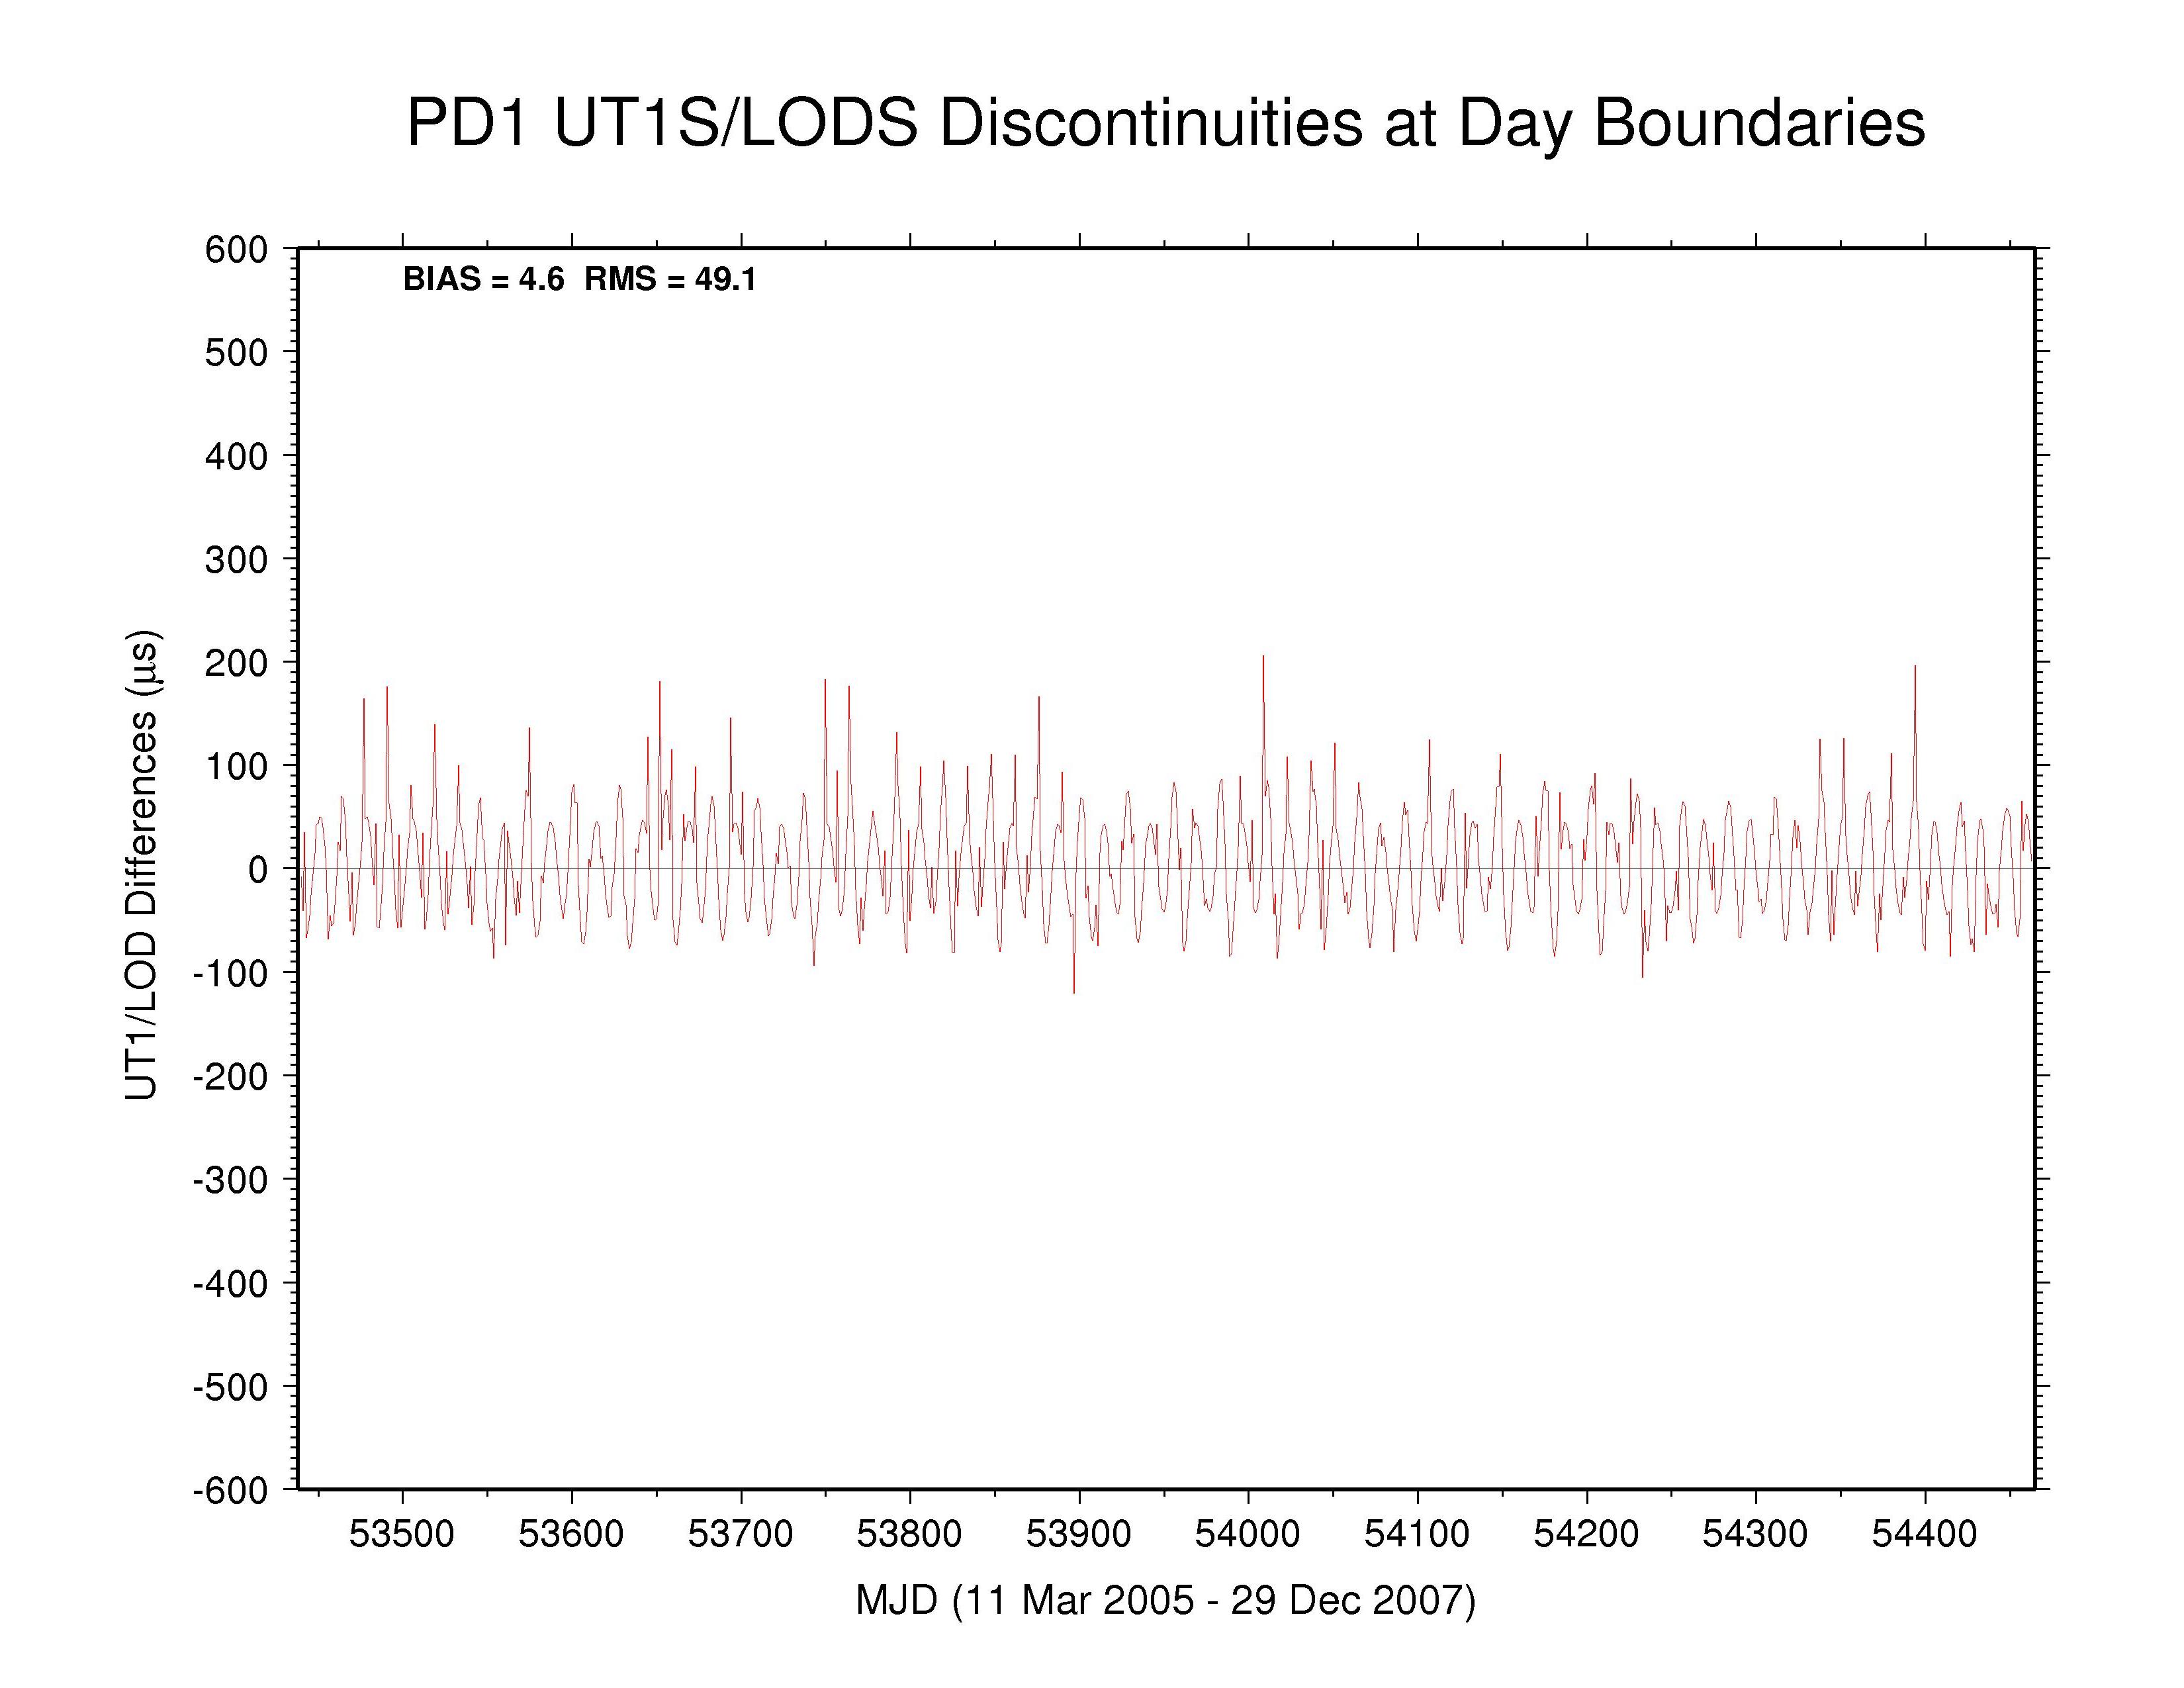 PDR LOD discontinuities